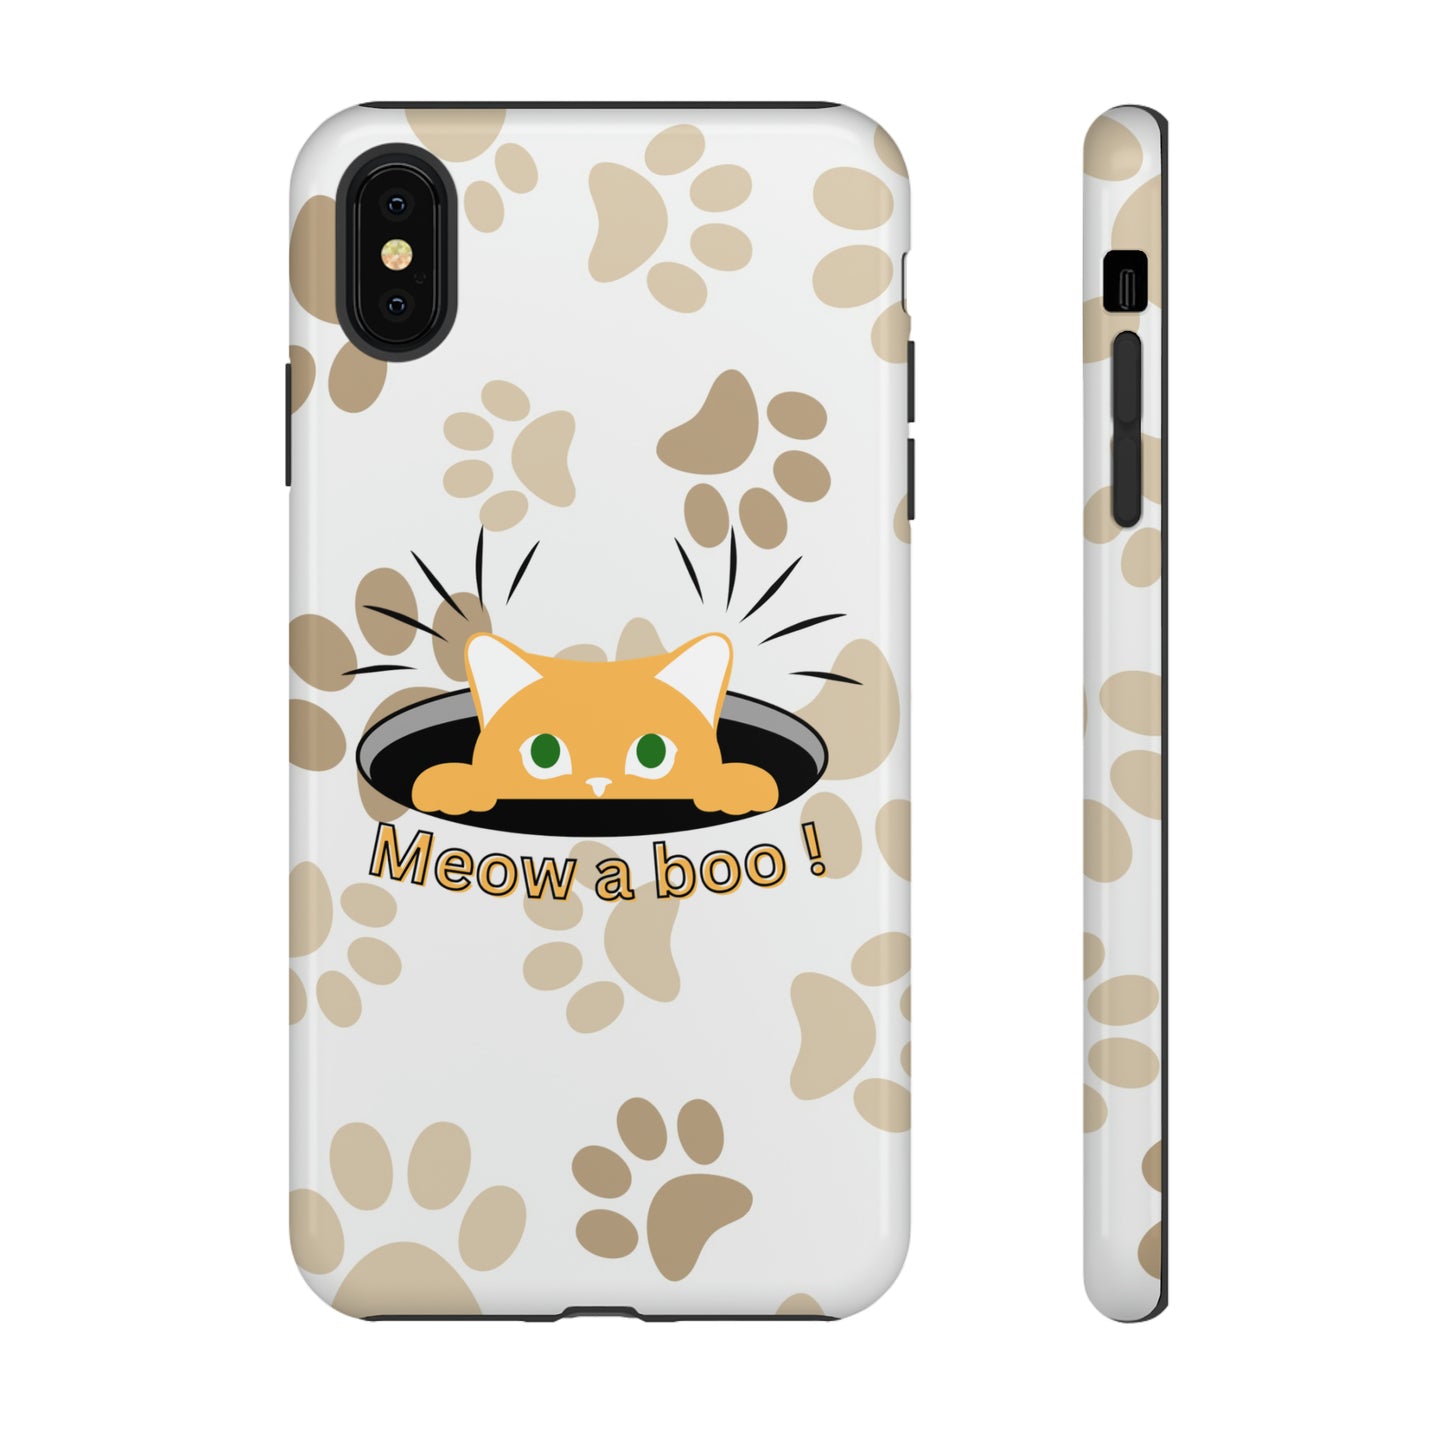 Meow a boo Cat Phone Tough Cases